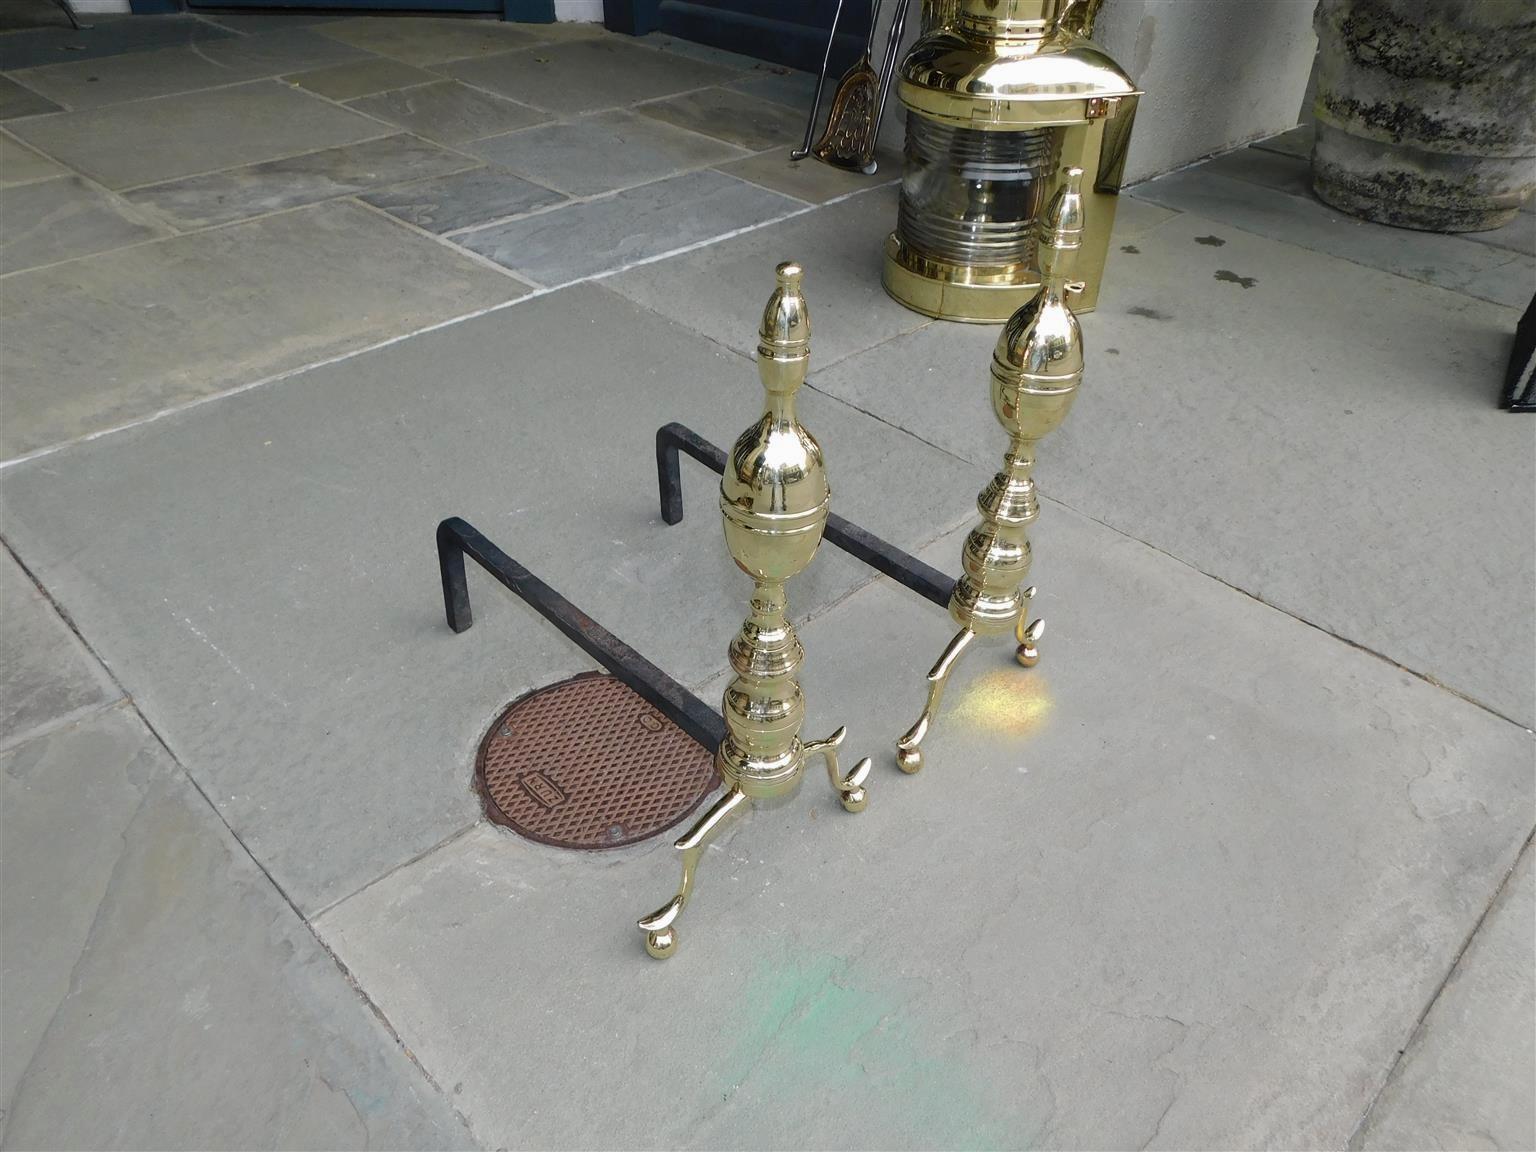 Pair of American brass banded flanking lemon on lemon finial andirons with turned bulbous plinths, original rear wrought iron dog legs, and resting on double spur legs with ball feet. New York, Early 19th Century.